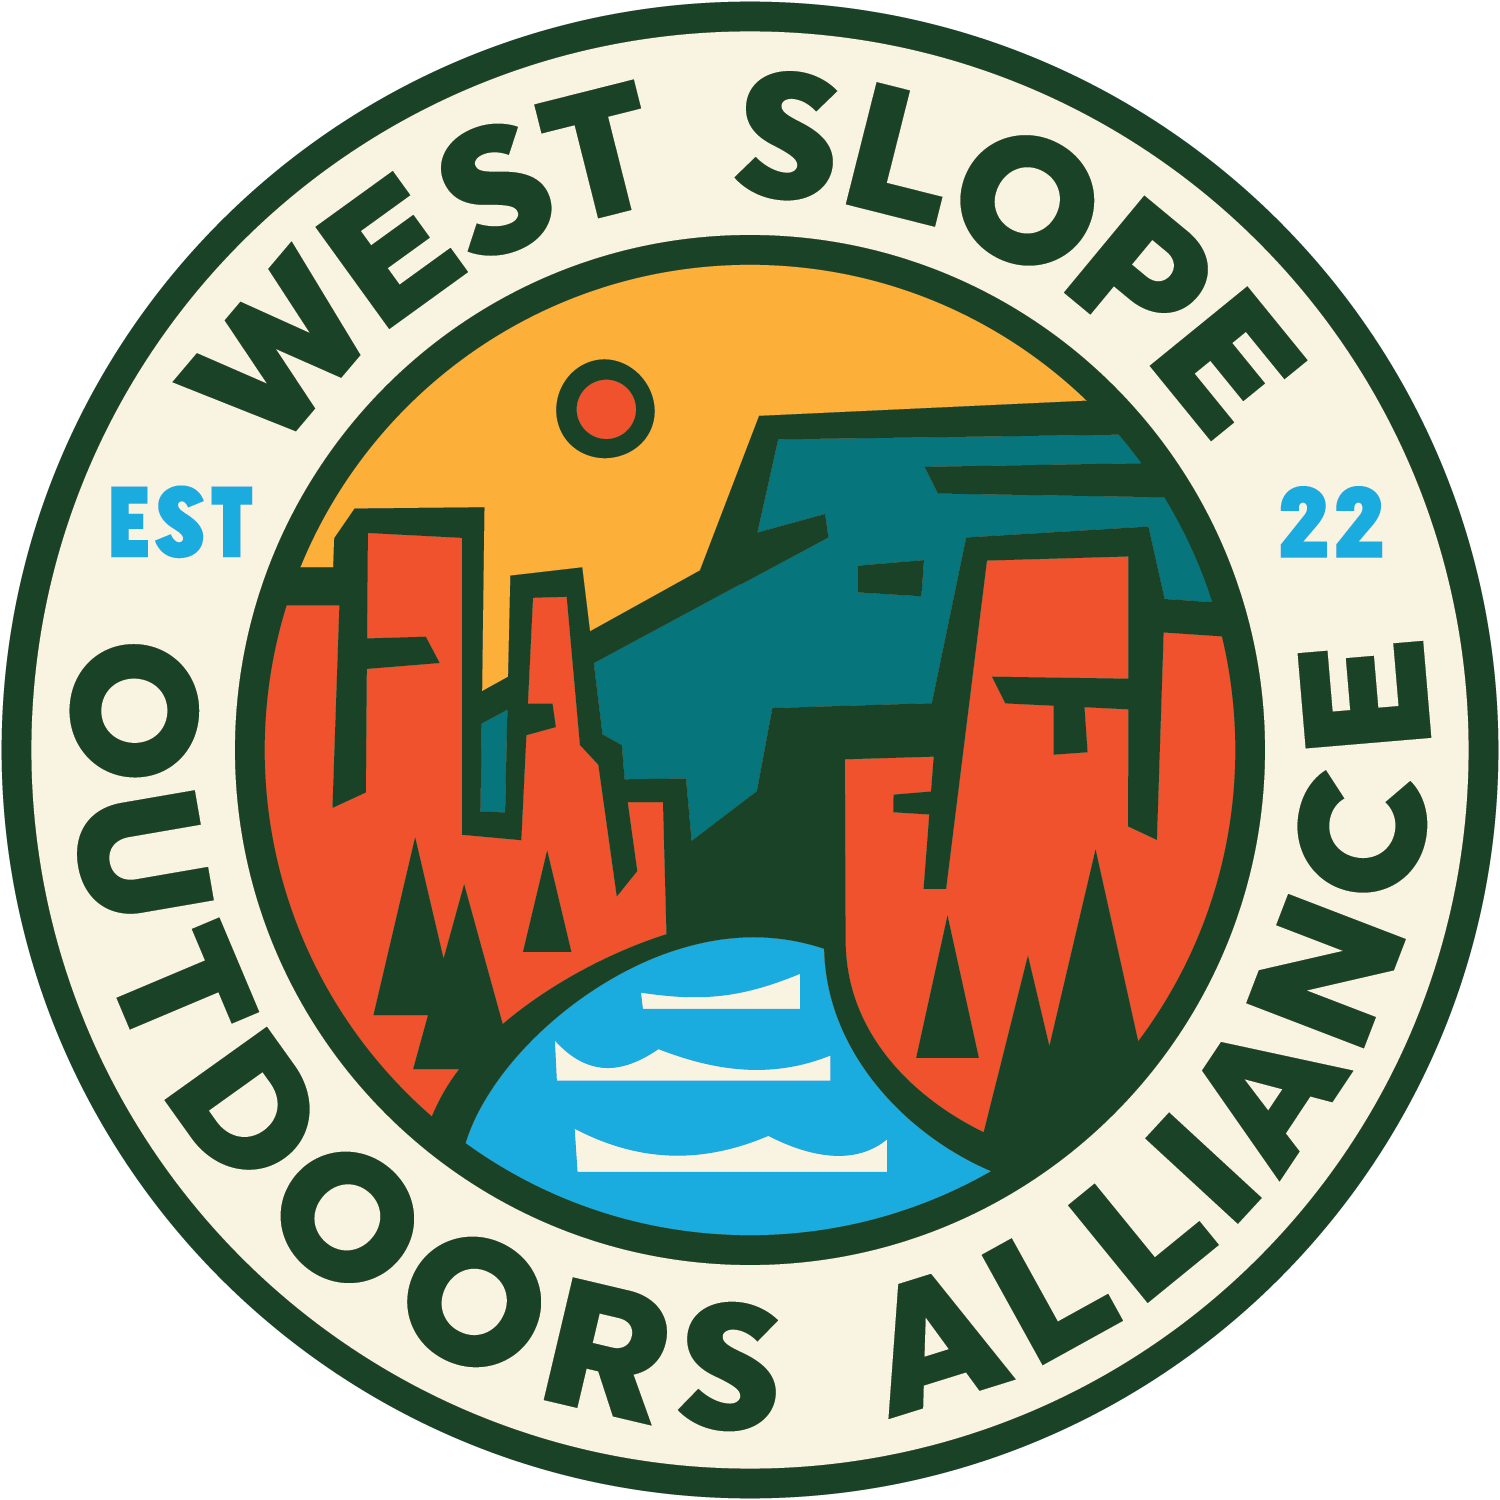 West Slope Outdoors Alliance